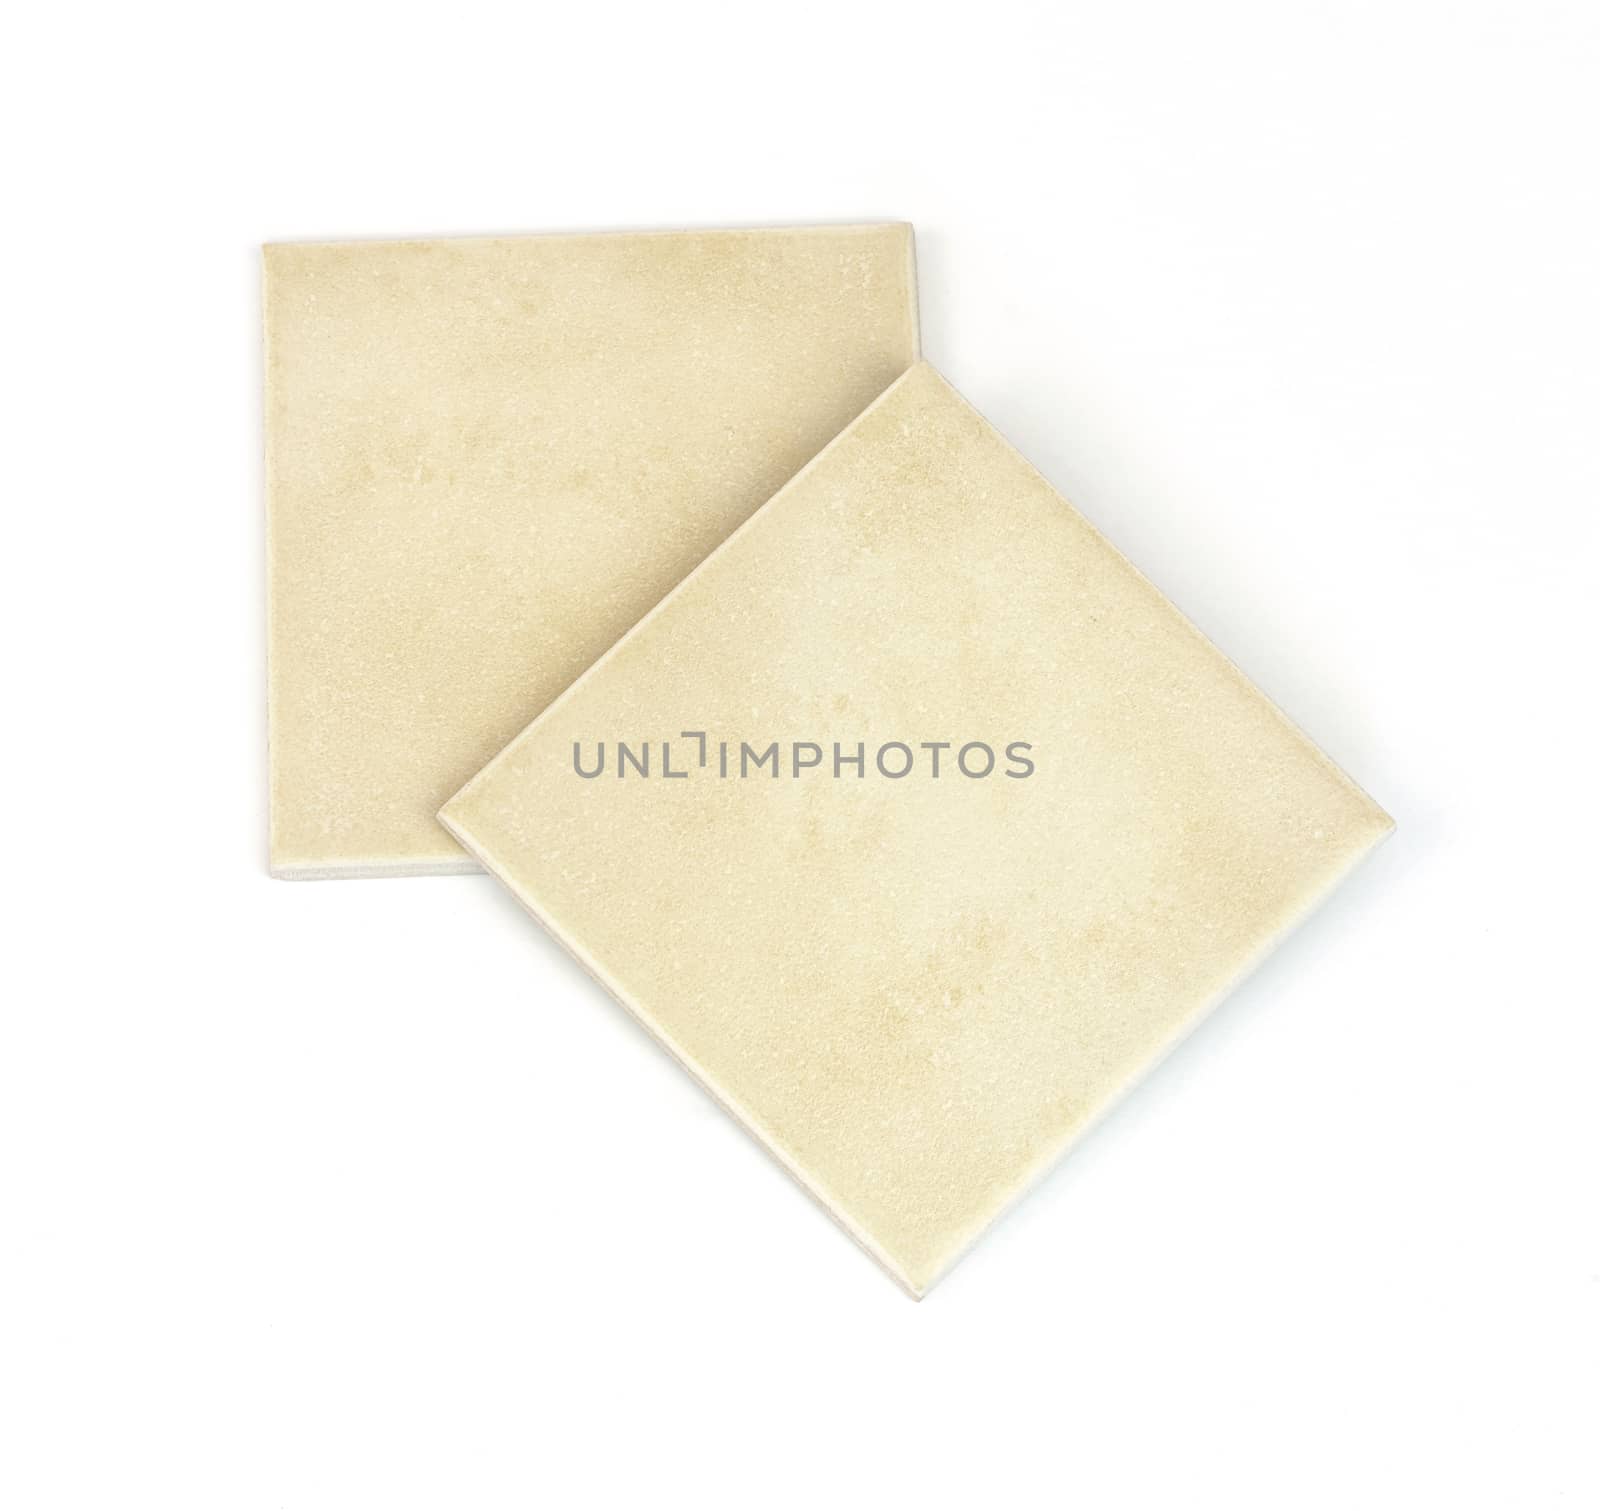 Two ceramic tiles. Isolated on white background